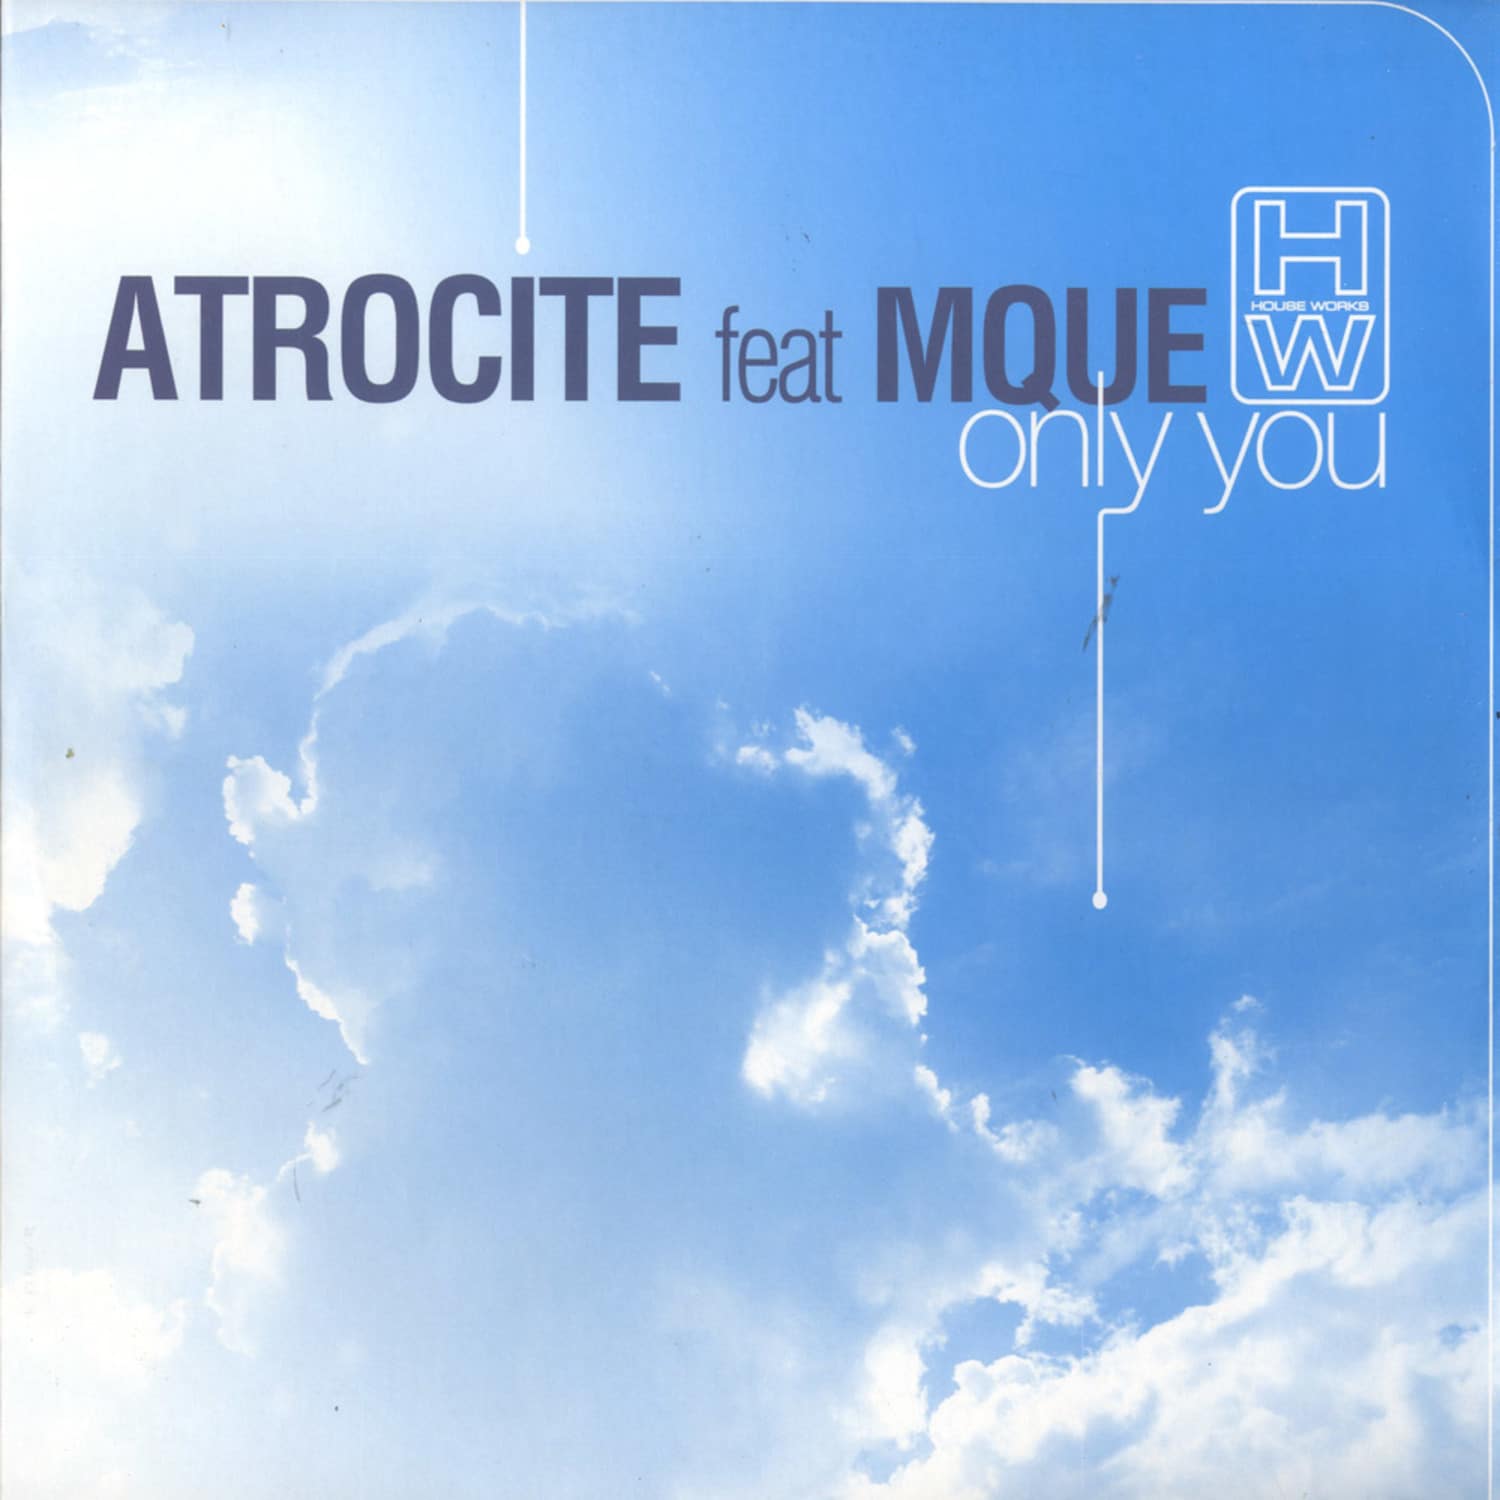 Atrocite feat. Mque - ONLY YOU